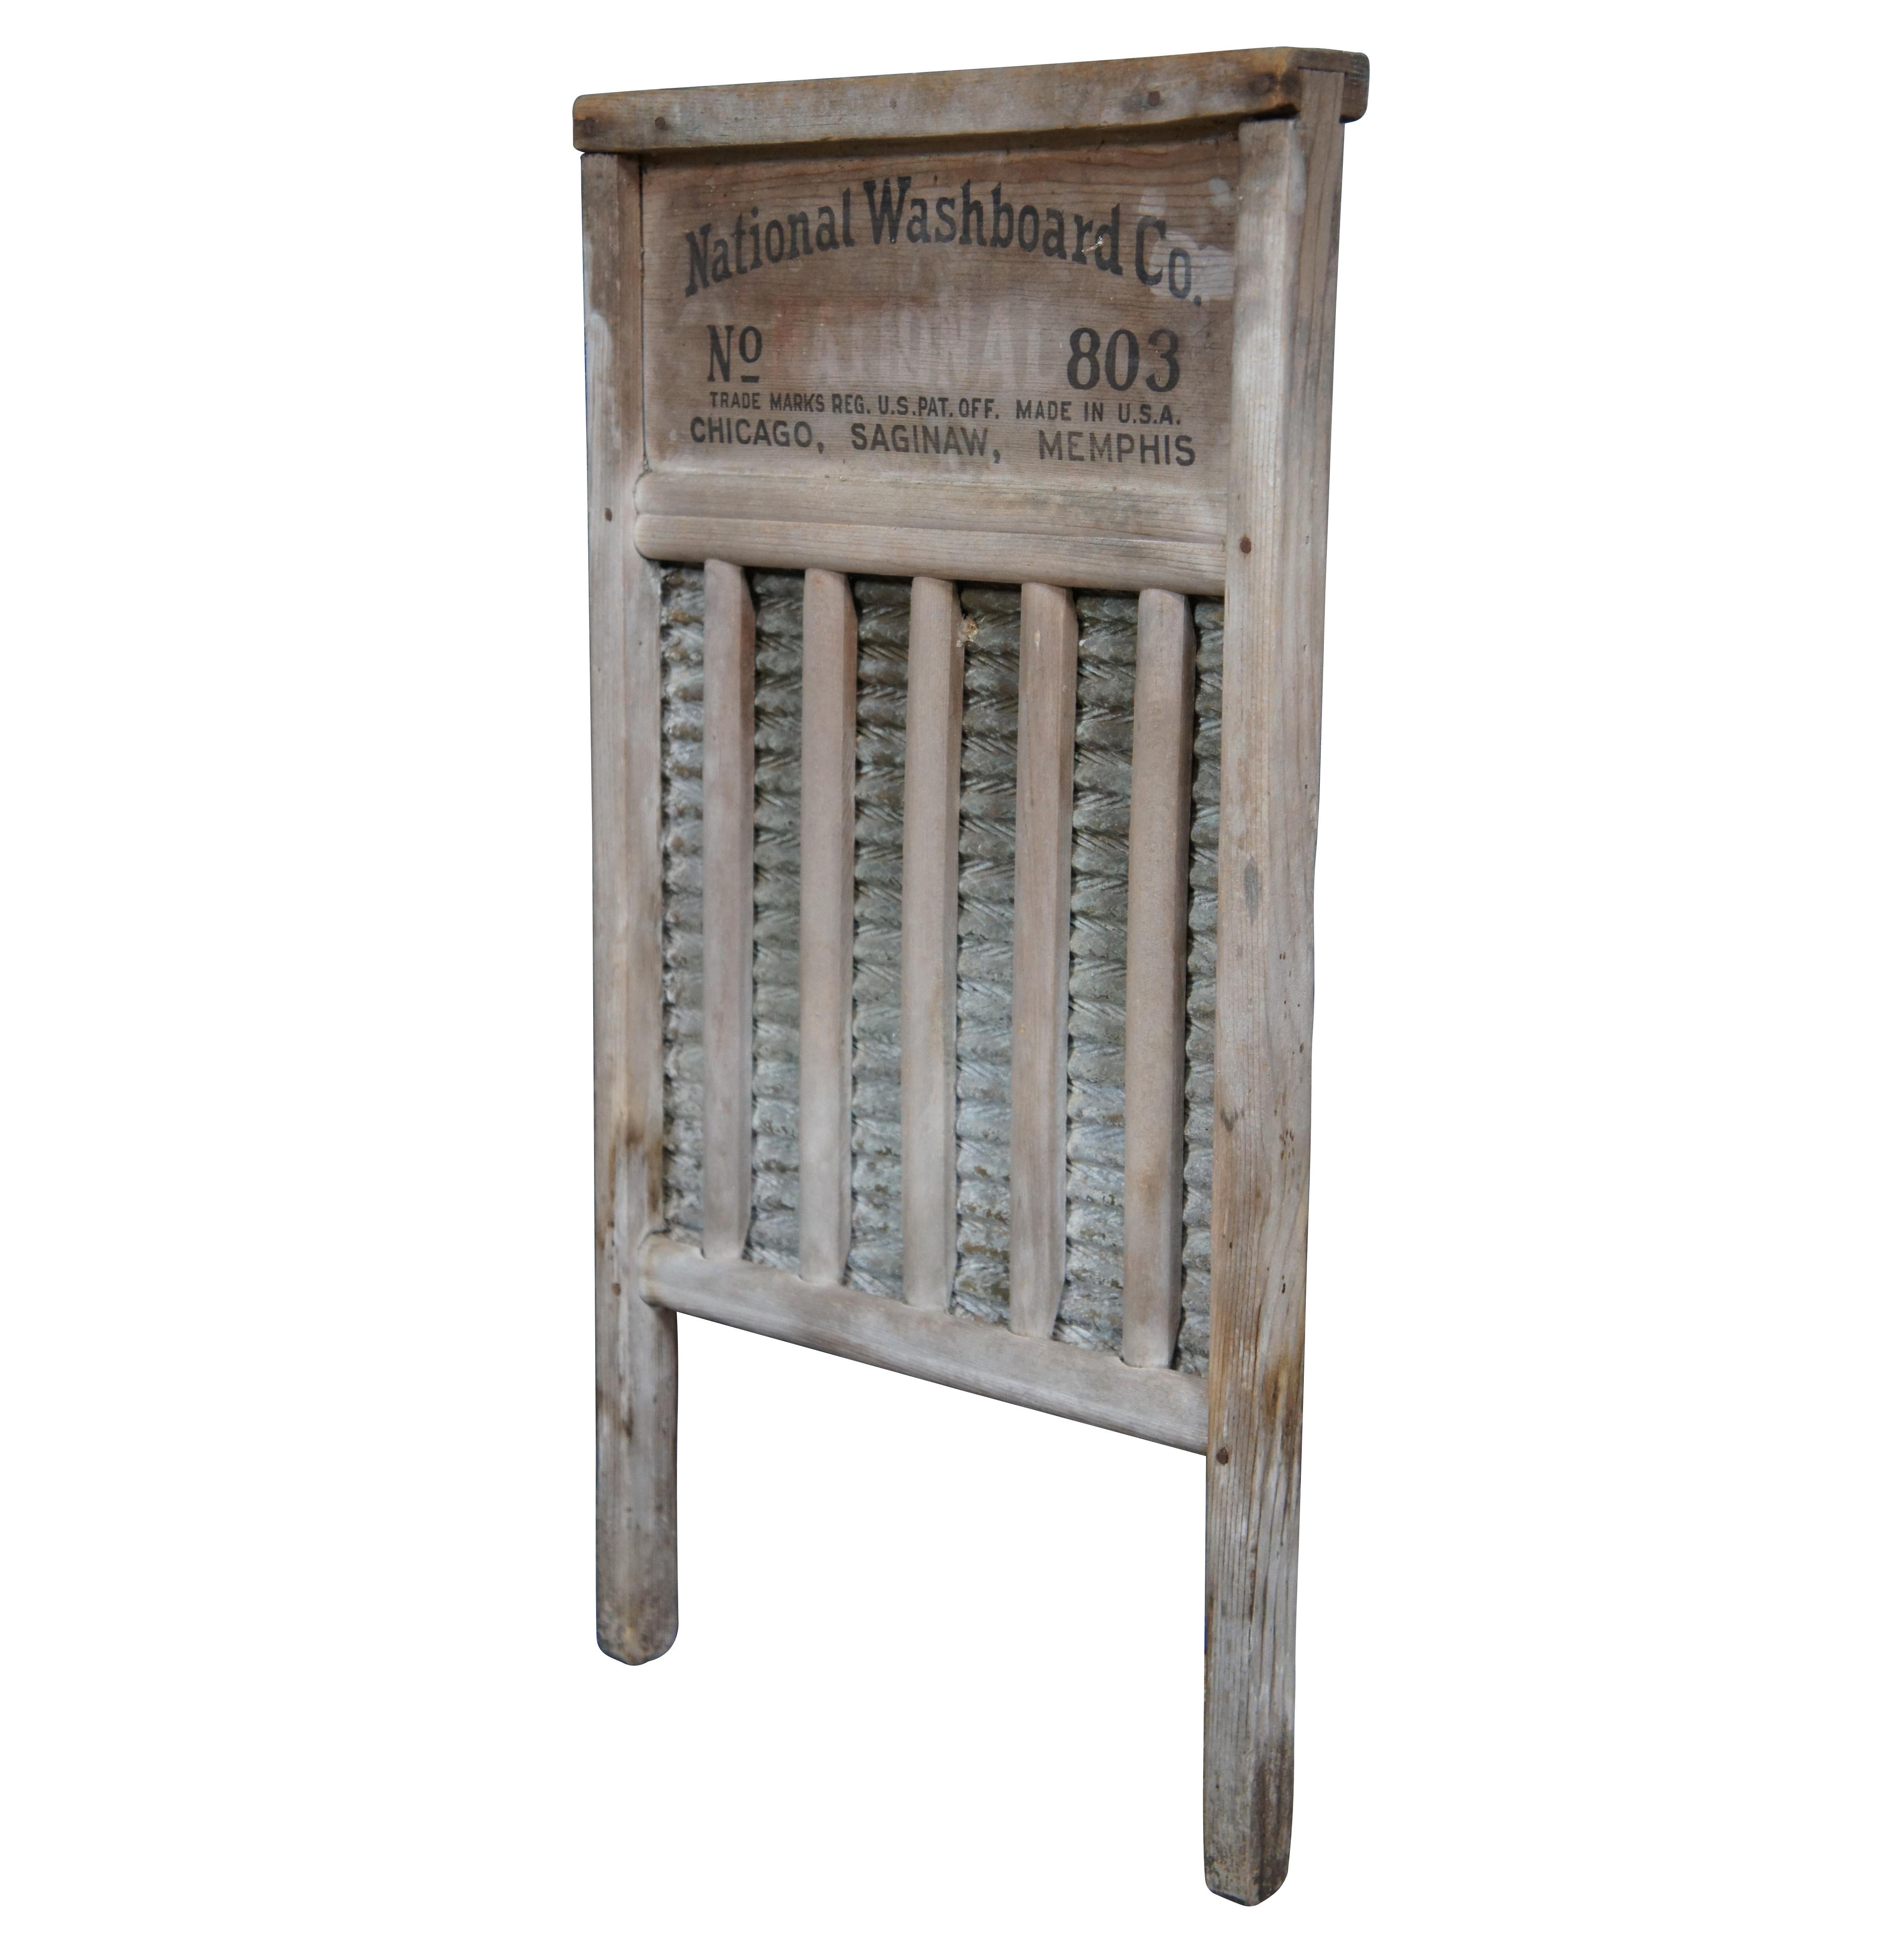 Antique wood and metal, sanitary front drain wash board by The National Washboard Company, The Brass King, Top Notch, Number 803. Size: 24